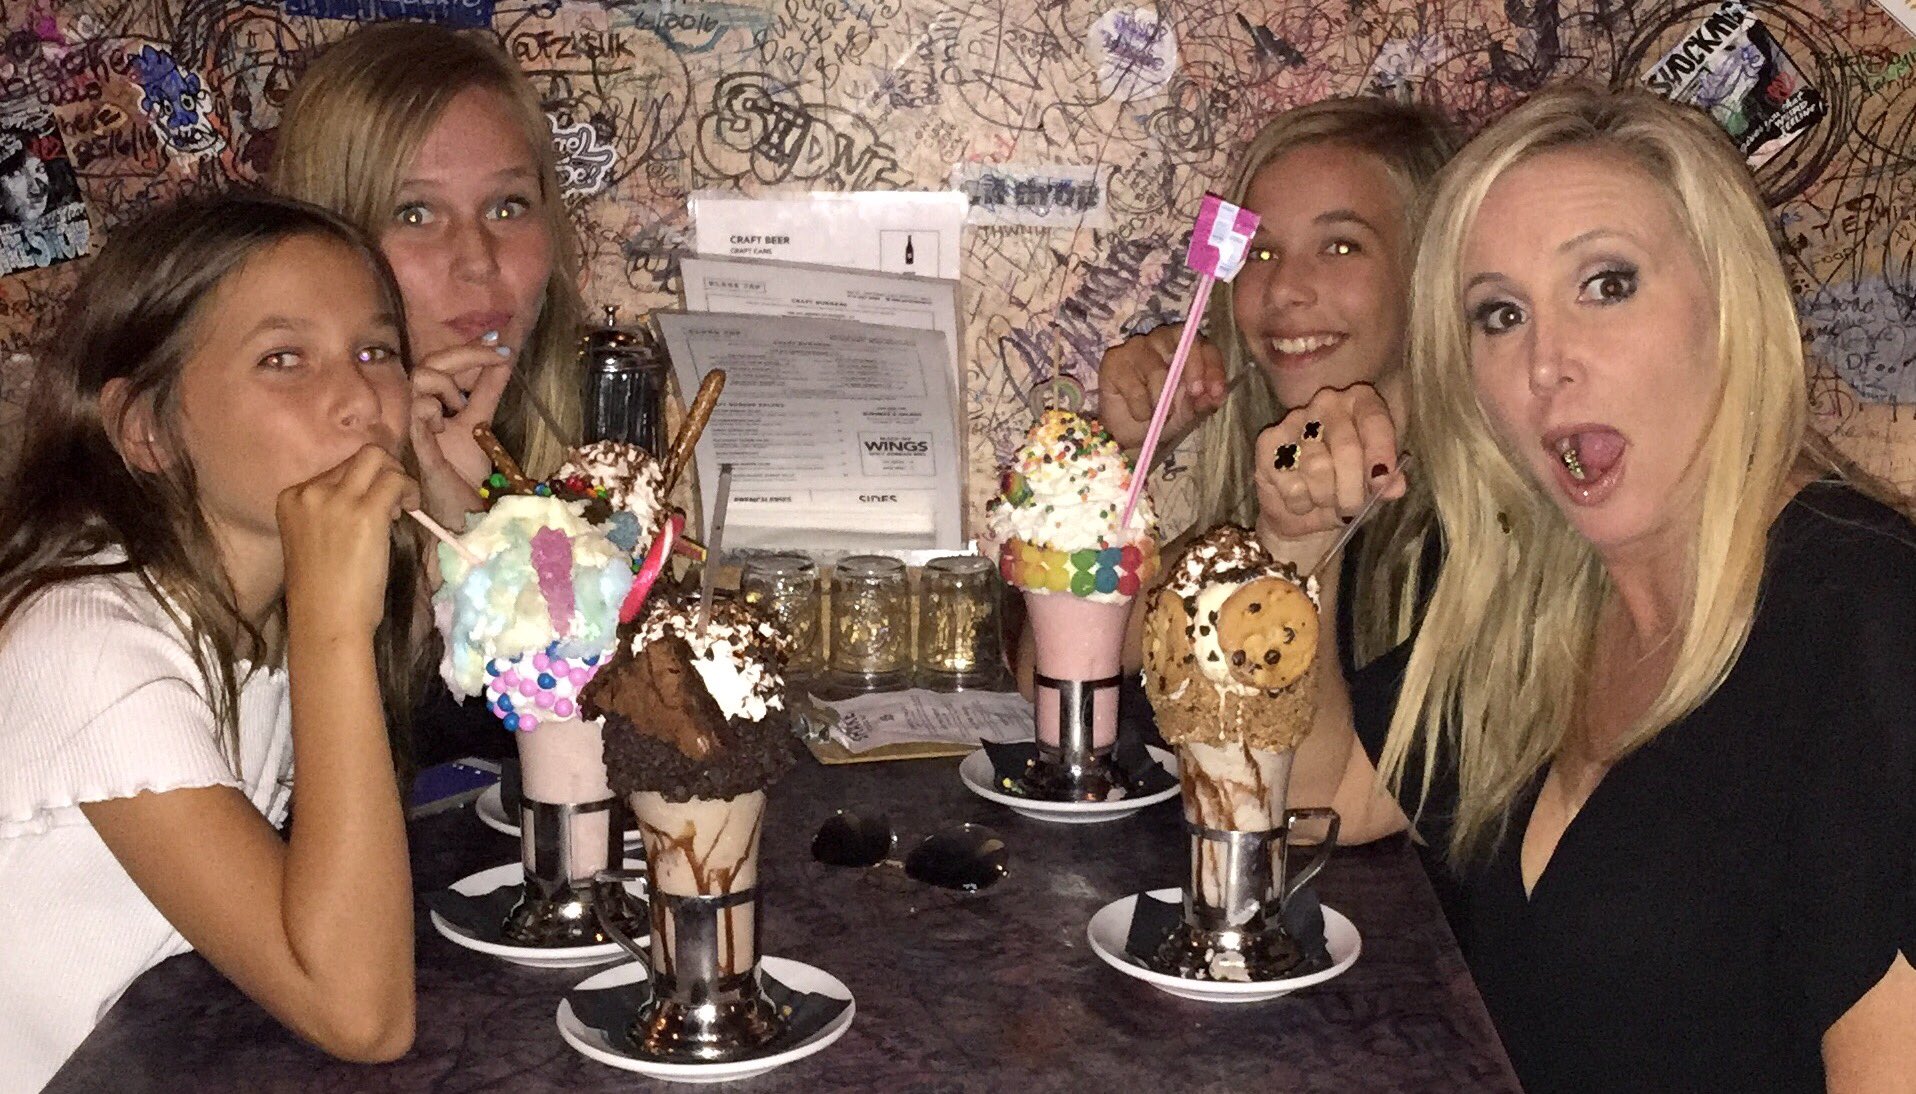 Shannon Beador enjoys sundaes with her daughters.